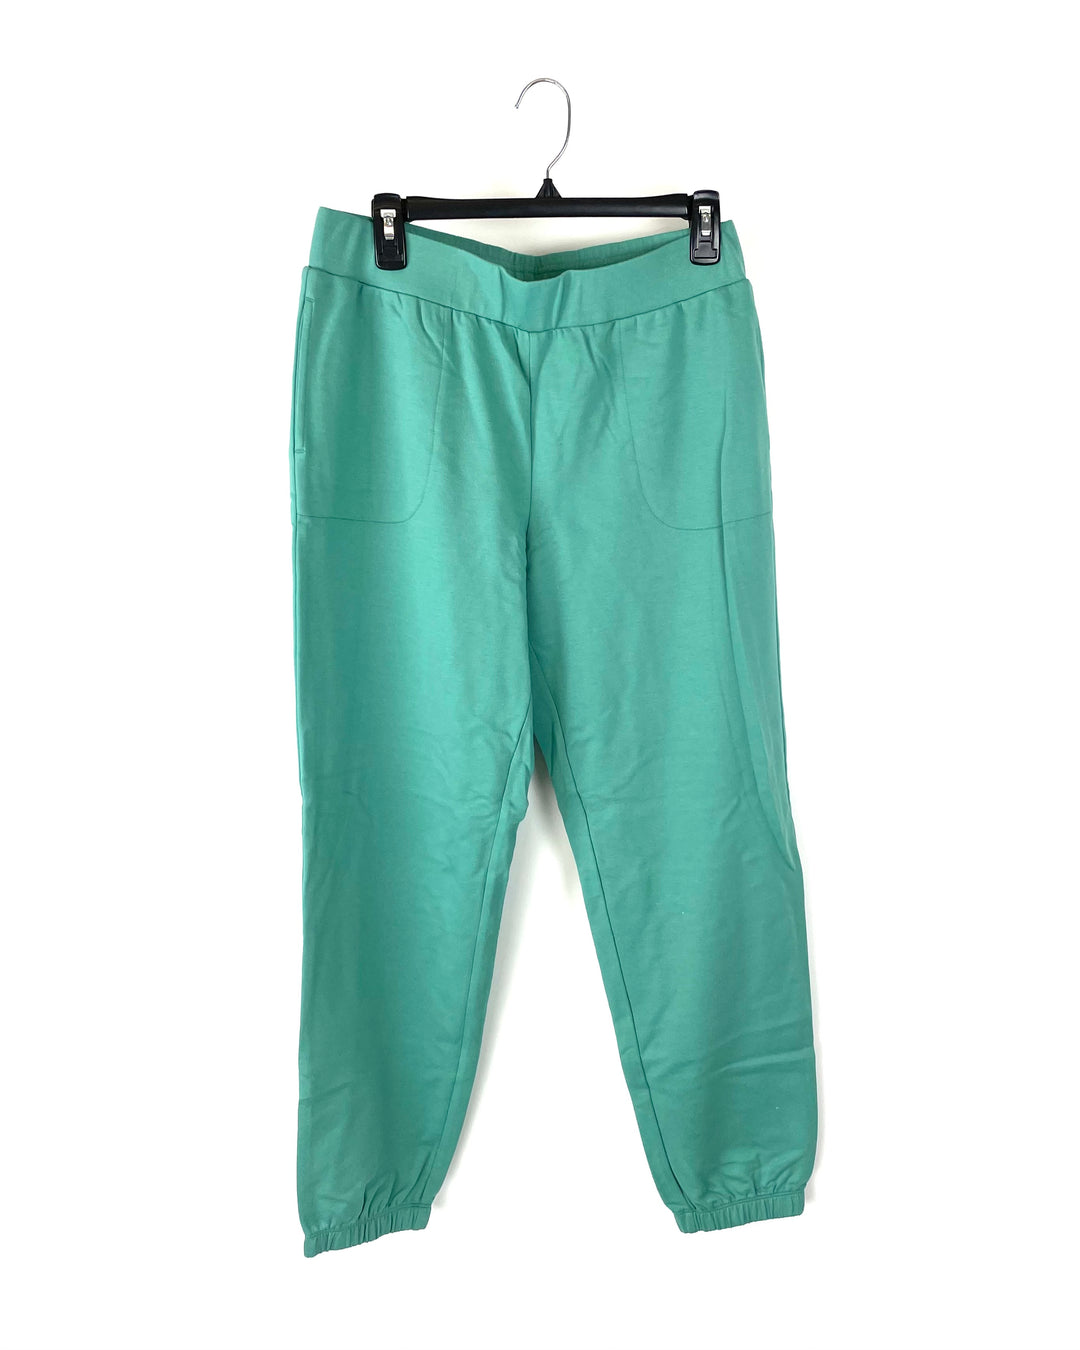 Green Joggers - Size 6-8